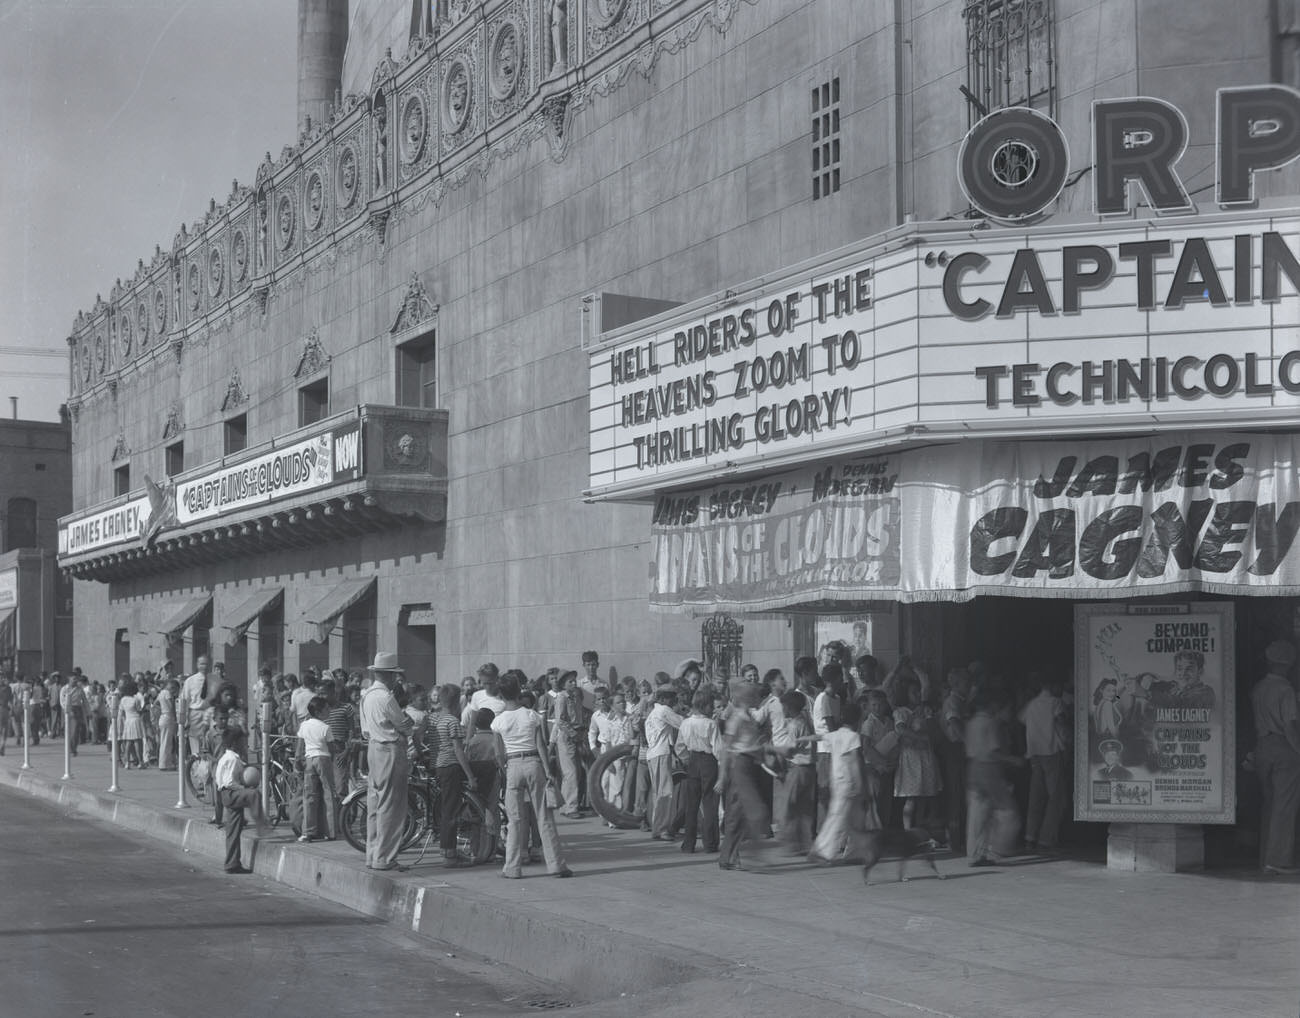 Marquee for the Orpheum Theatre During the Showing of "Captains of the Clouds", 1942